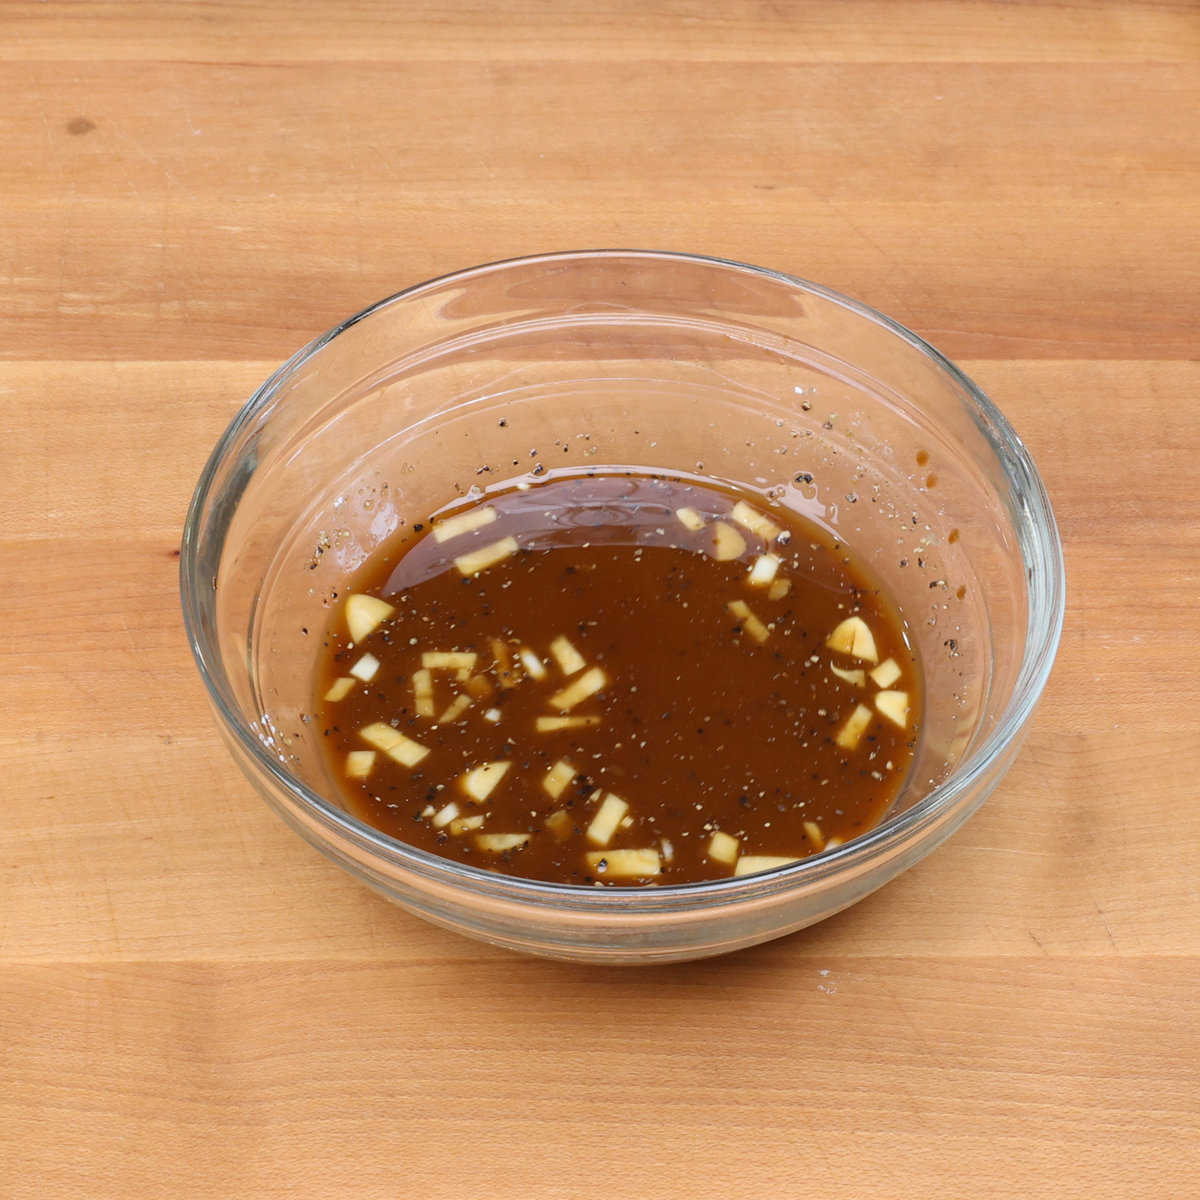 a bowl of stir fry sauce on a wooden counter.